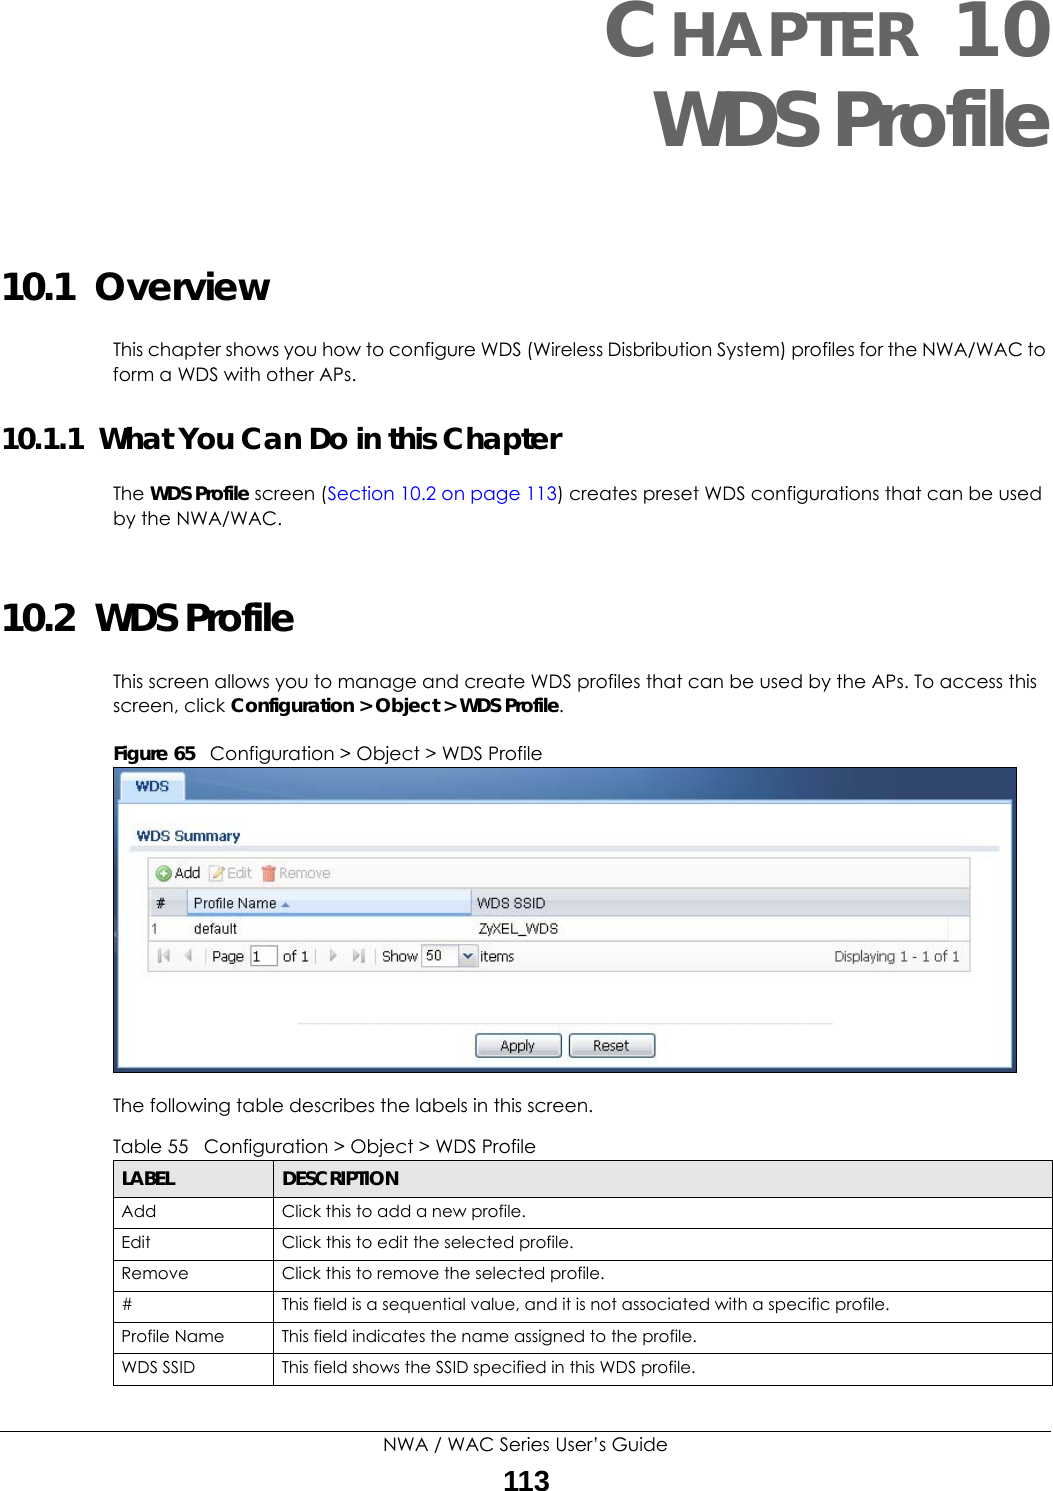 NWA / WAC Series User’s Guide113CHAPTER 10WDS Profile10.1  OverviewThis chapter shows you how to configure WDS (Wireless Disbribution System) profiles for the NWA/WAC to form a WDS with other APs.10.1.1  What You Can Do in this ChapterThe WDS Profile screen (Section 10.2 on page 113) creates preset WDS configurations that can be used by the NWA/WAC.10.2  WDS Profile This screen allows you to manage and create WDS profiles that can be used by the APs. To access this screen, click Configuration &gt; Object &gt; WDS Profile.Figure 65   Configuration &gt; Object &gt; WDS ProfileThe following table describes the labels in this screen.  Table 55   Configuration &gt; Object &gt; WDS ProfileLABEL DESCRIPTIONAdd Click this to add a new profile.Edit Click this to edit the selected profile.Remove Click this to remove the selected profile.# This field is a sequential value, and it is not associated with a specific profile.Profile Name This field indicates the name assigned to the profile.WDS SSID This field shows the SSID specified in this WDS profile.